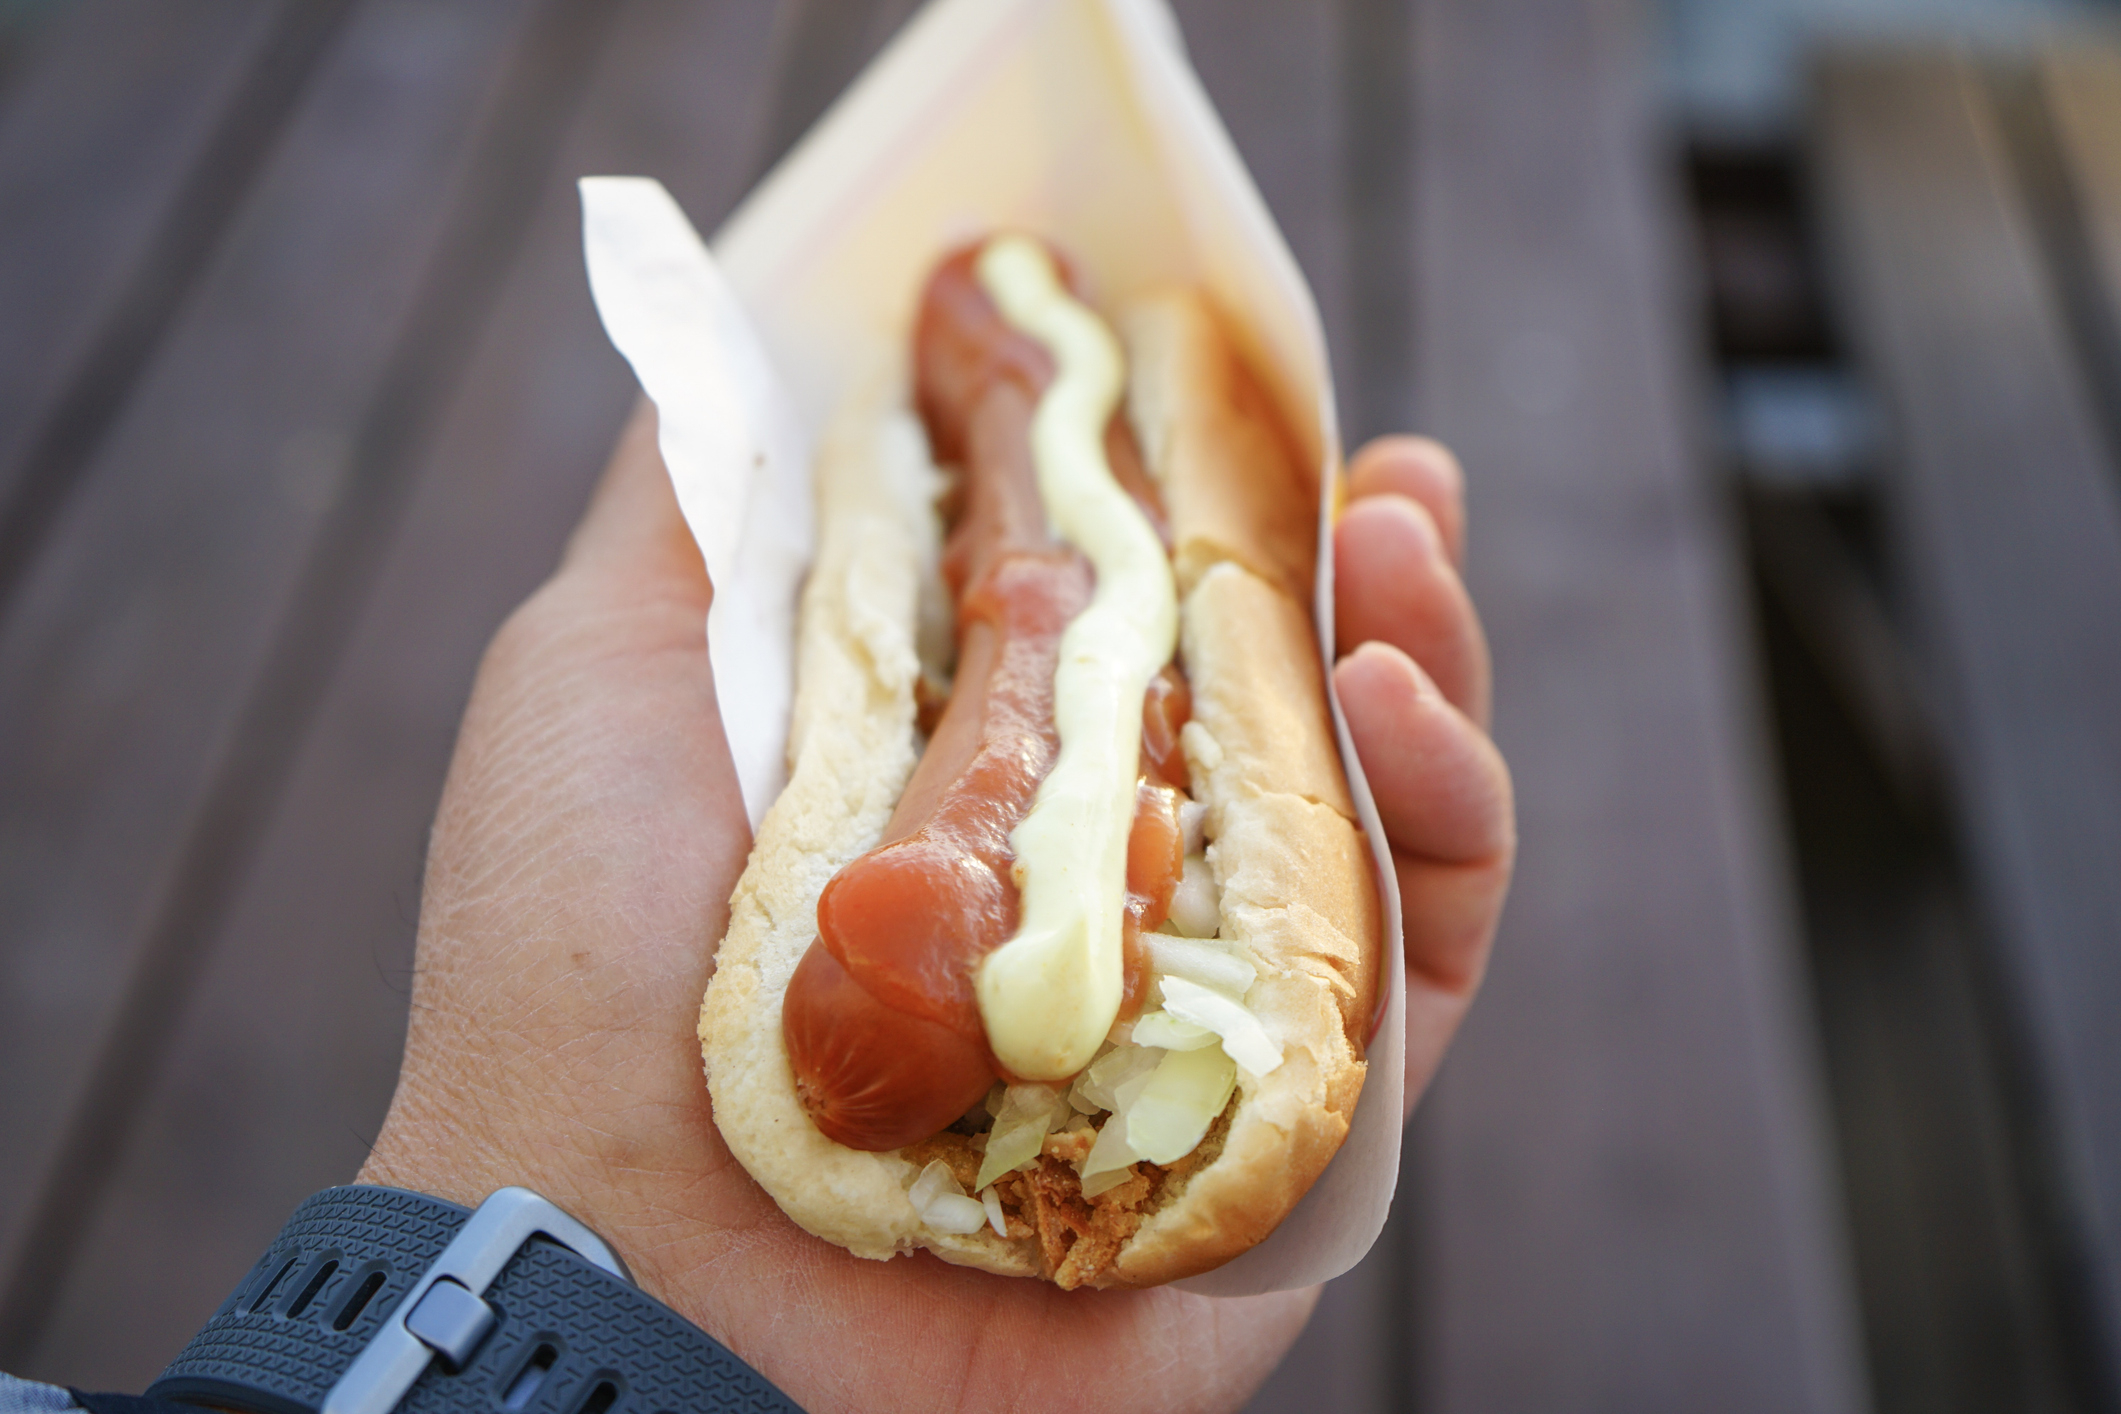 Close-up of a hand holding a hot dog with condiments. No individuals identified